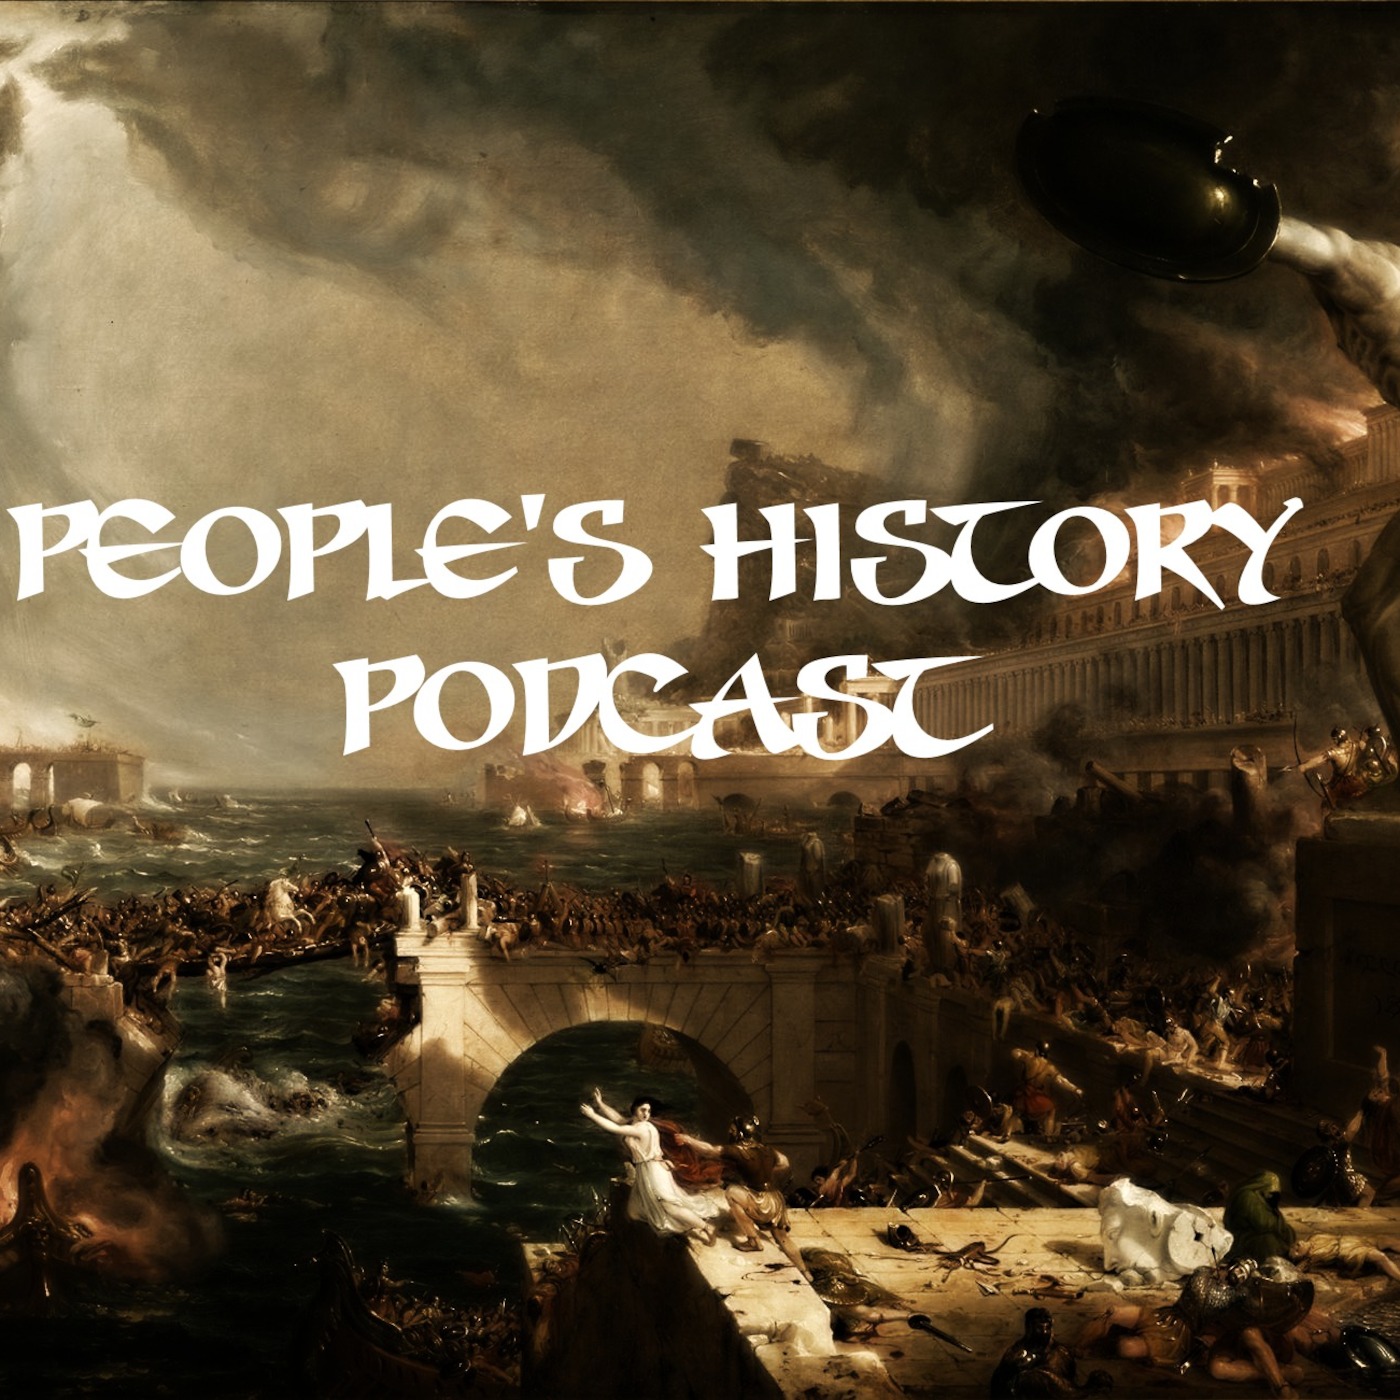 People's History Podcast